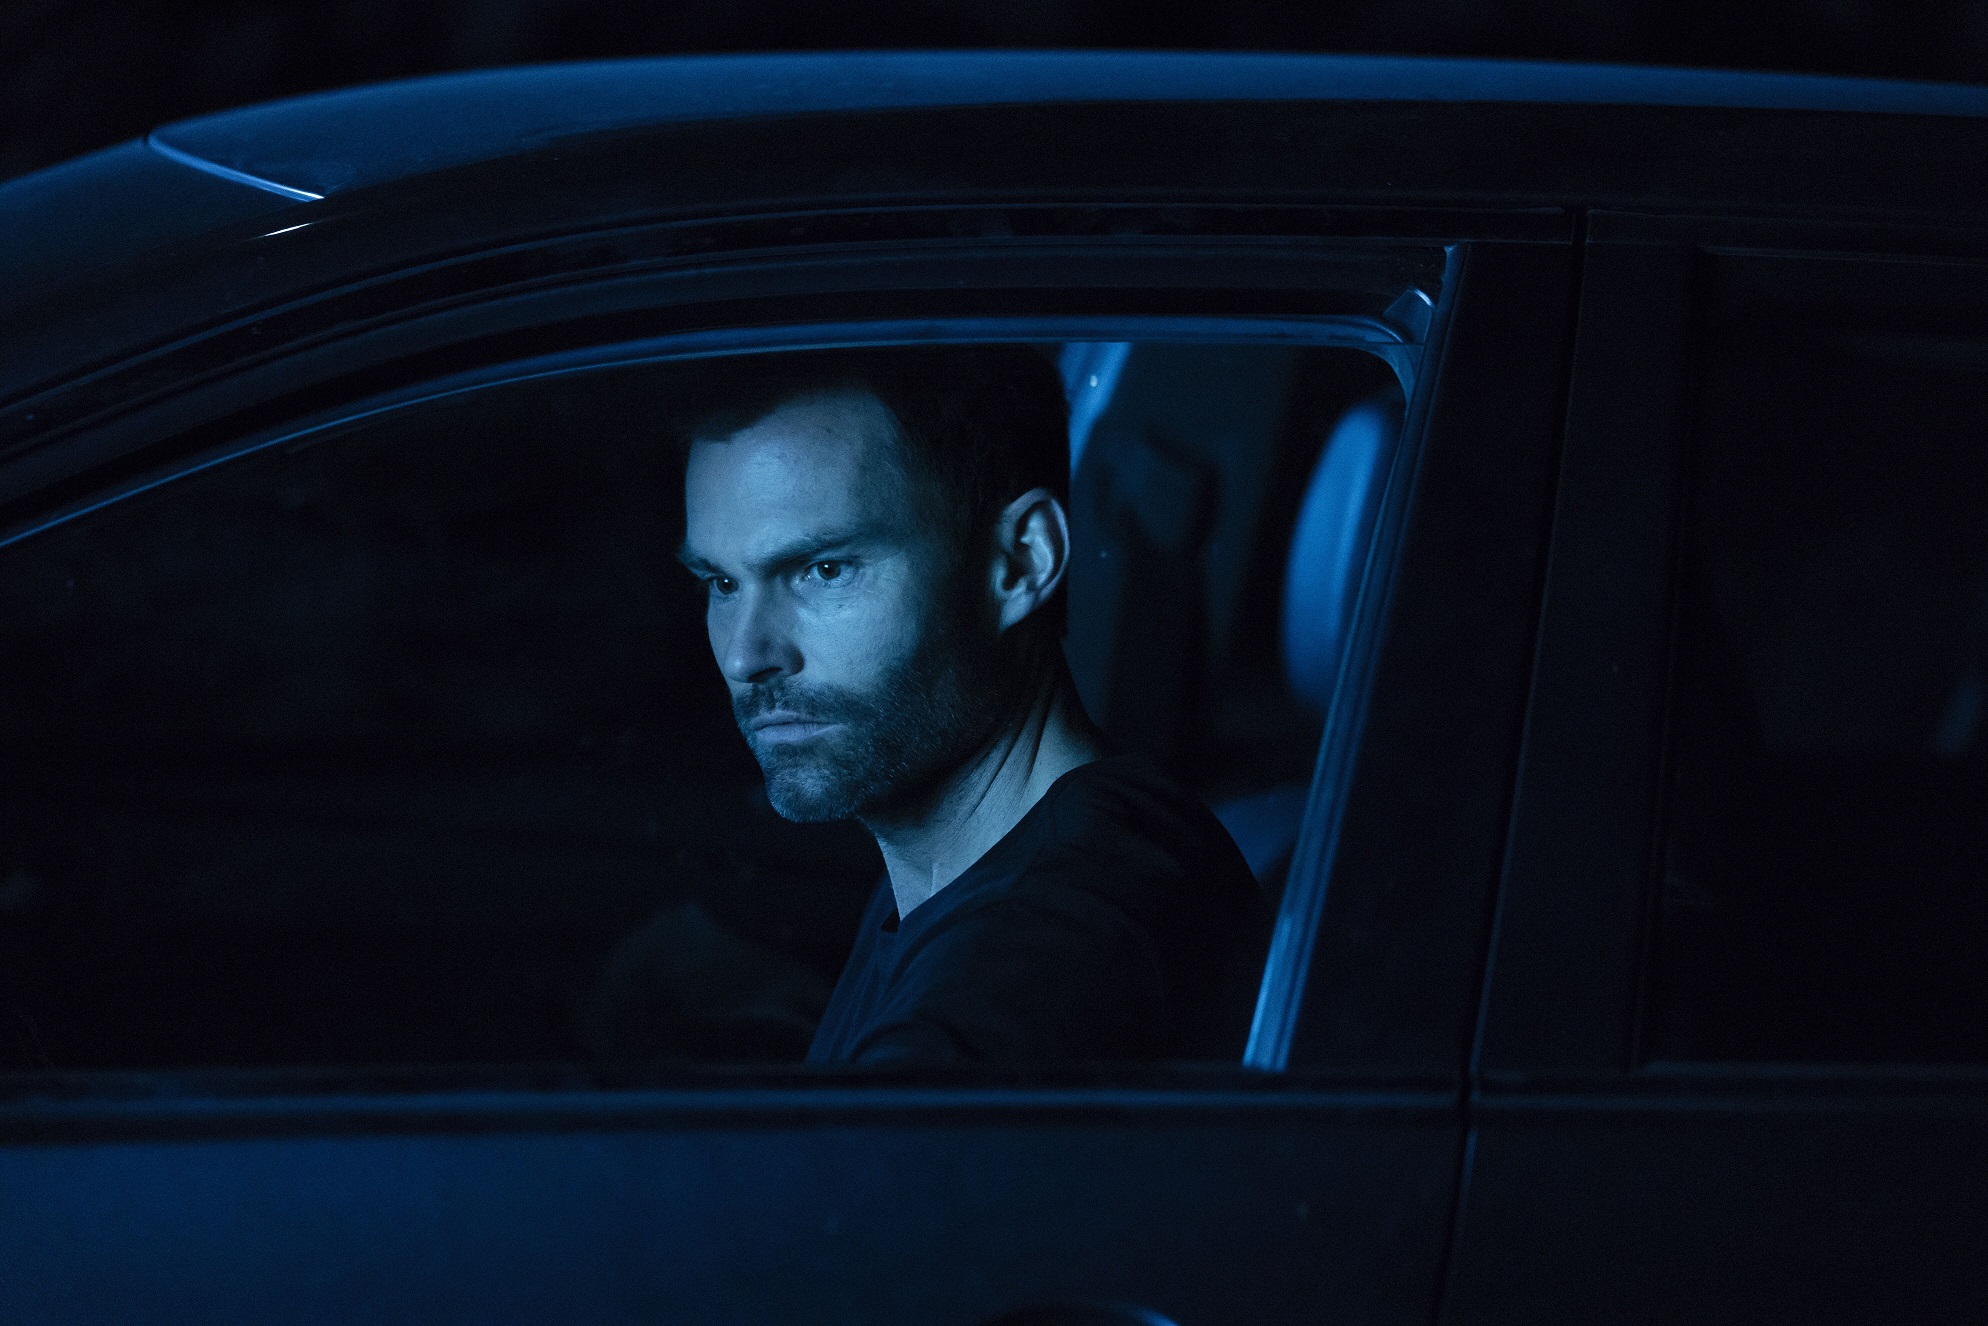 Bloodline – Seann William Scott Is A Kindly Killer In The New Blumhouse Thriller | Review